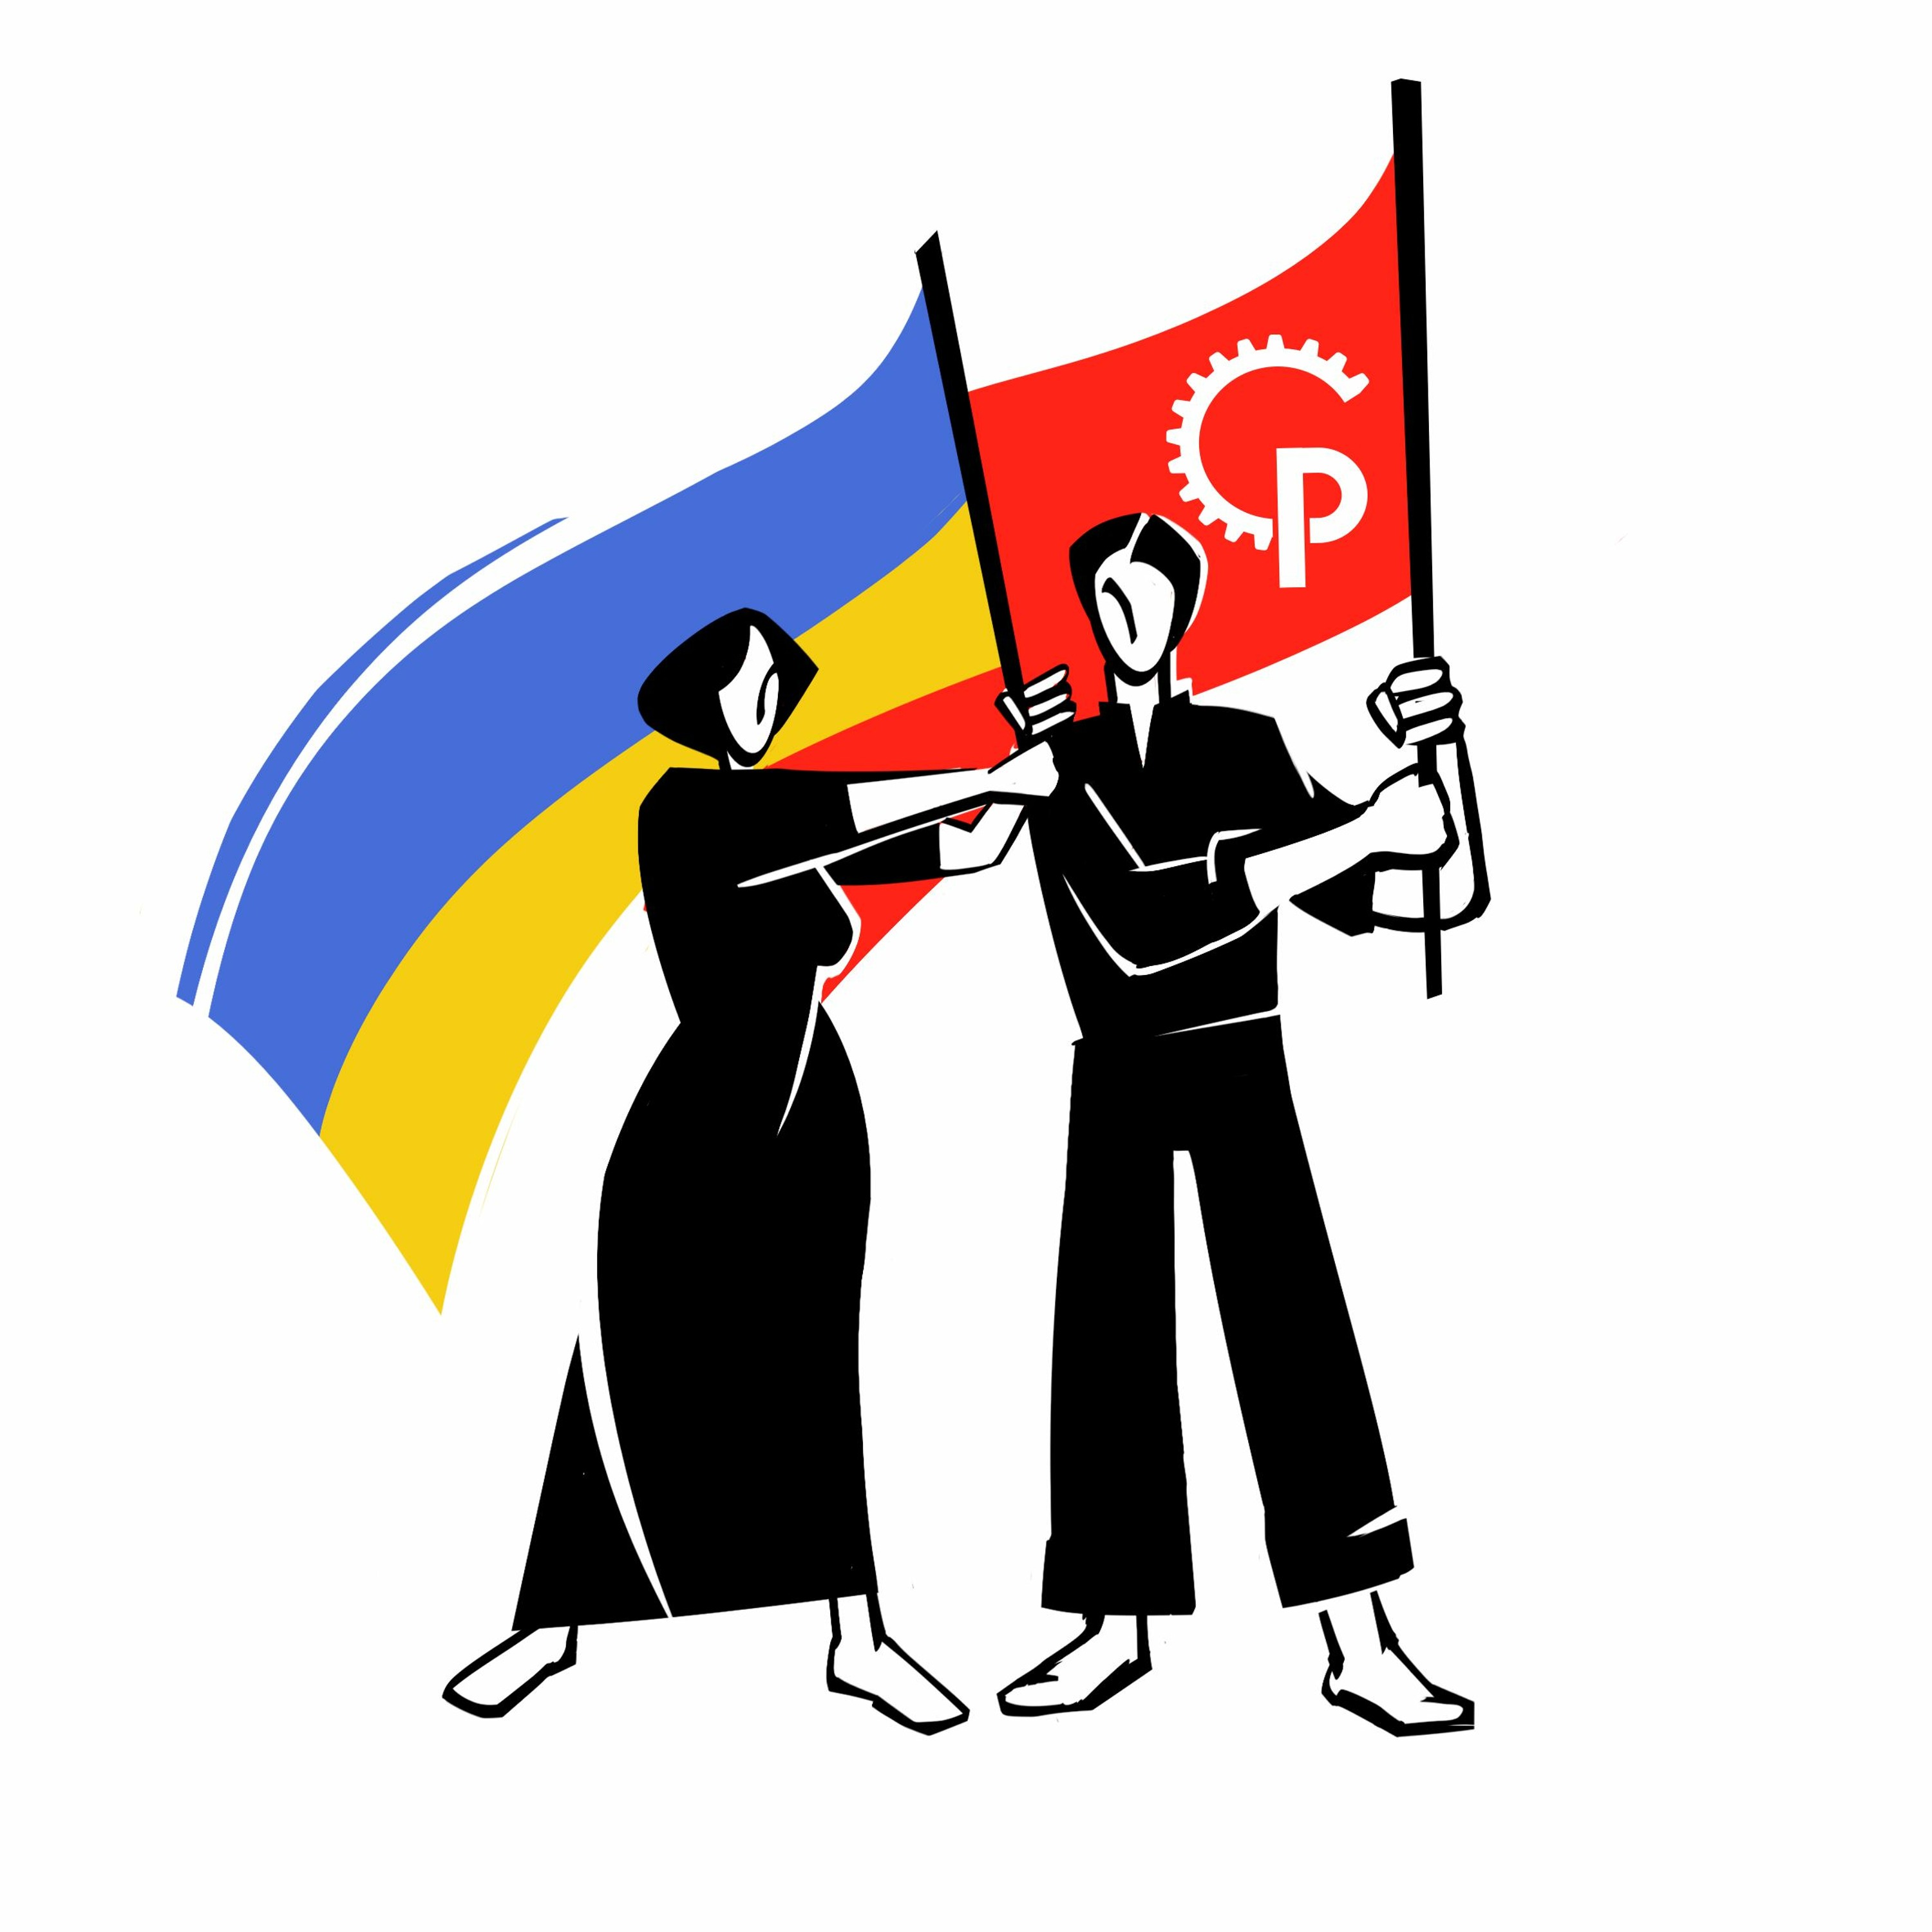 Workers' Solidarity with Ukraine | Ideas for Freedom 2022